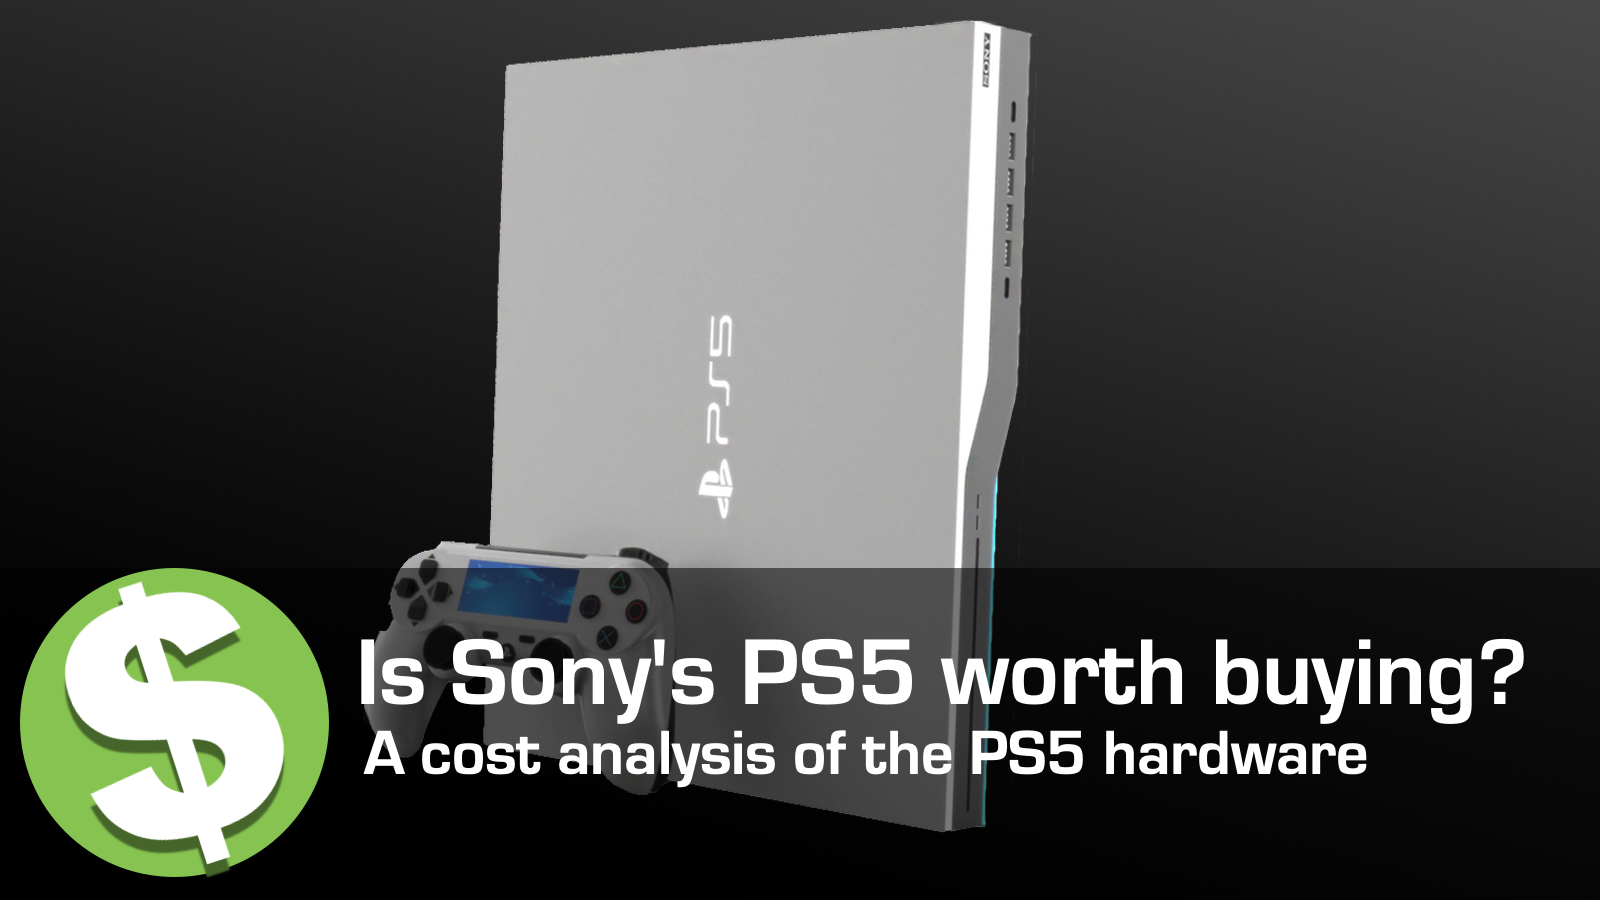 Will_electronics_buy ps5